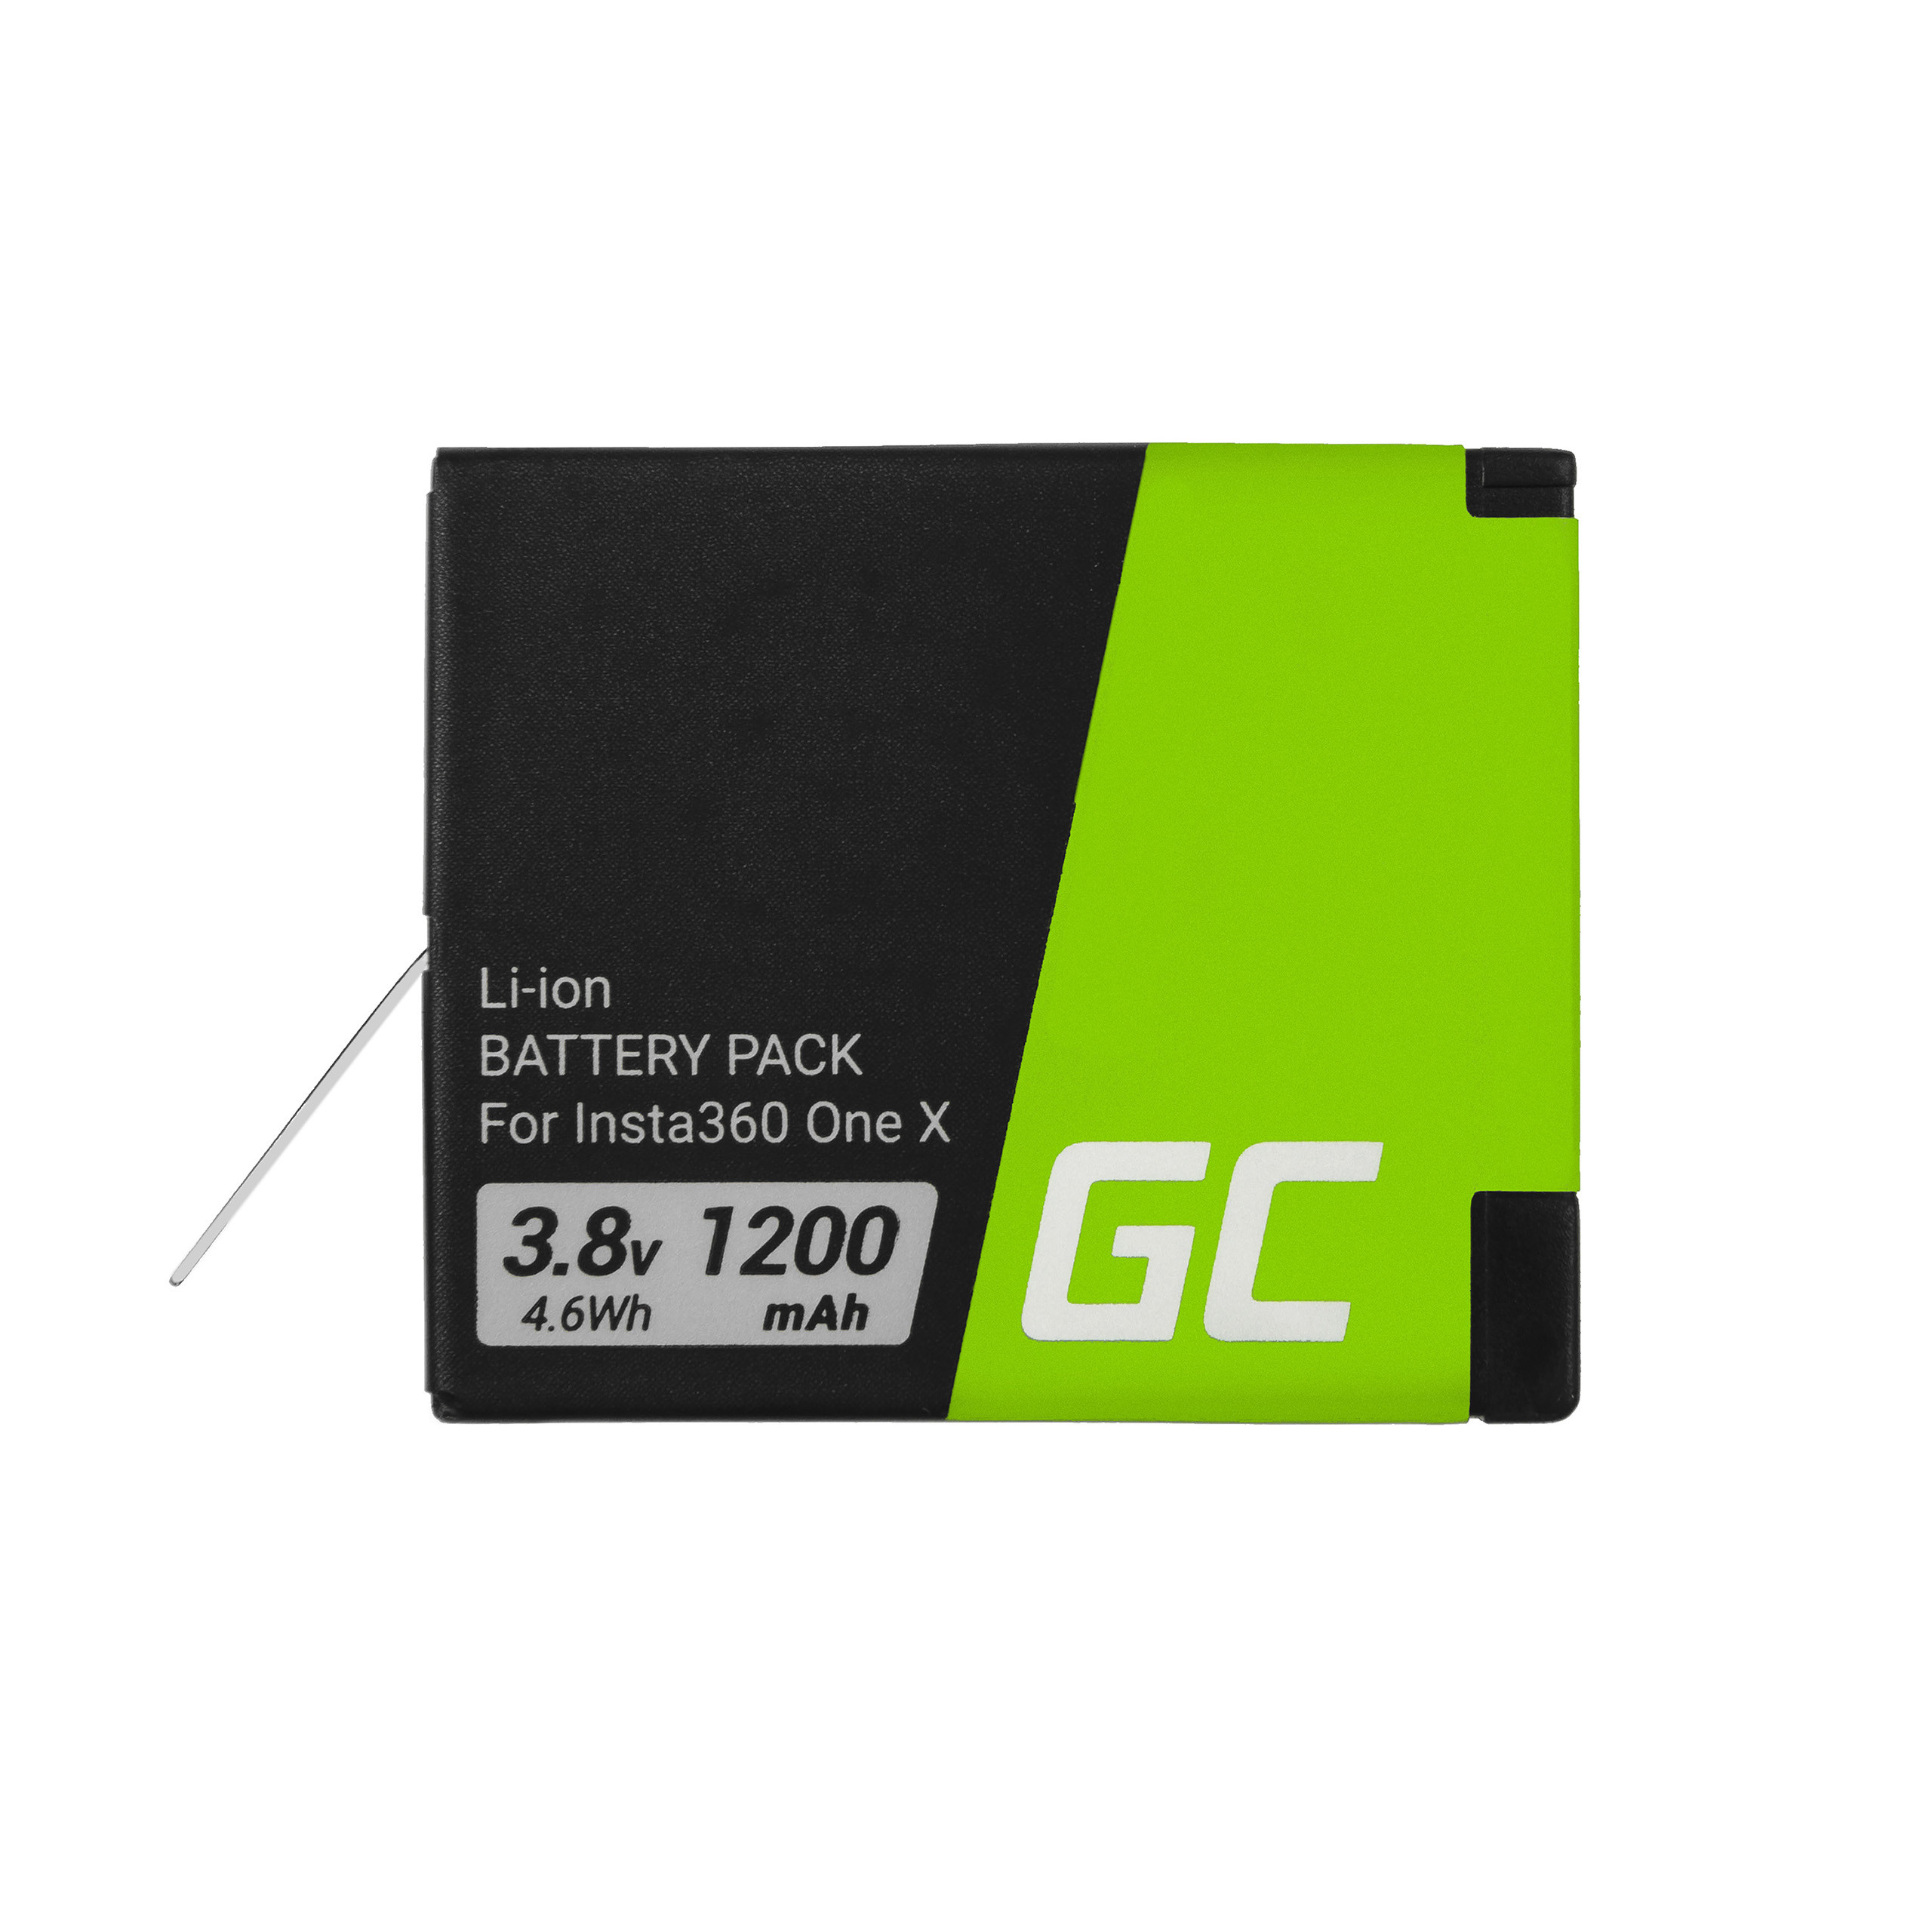 EOL-Green Cell Camera Battery for INSTA360 ONE X 3.8V 1200mAh